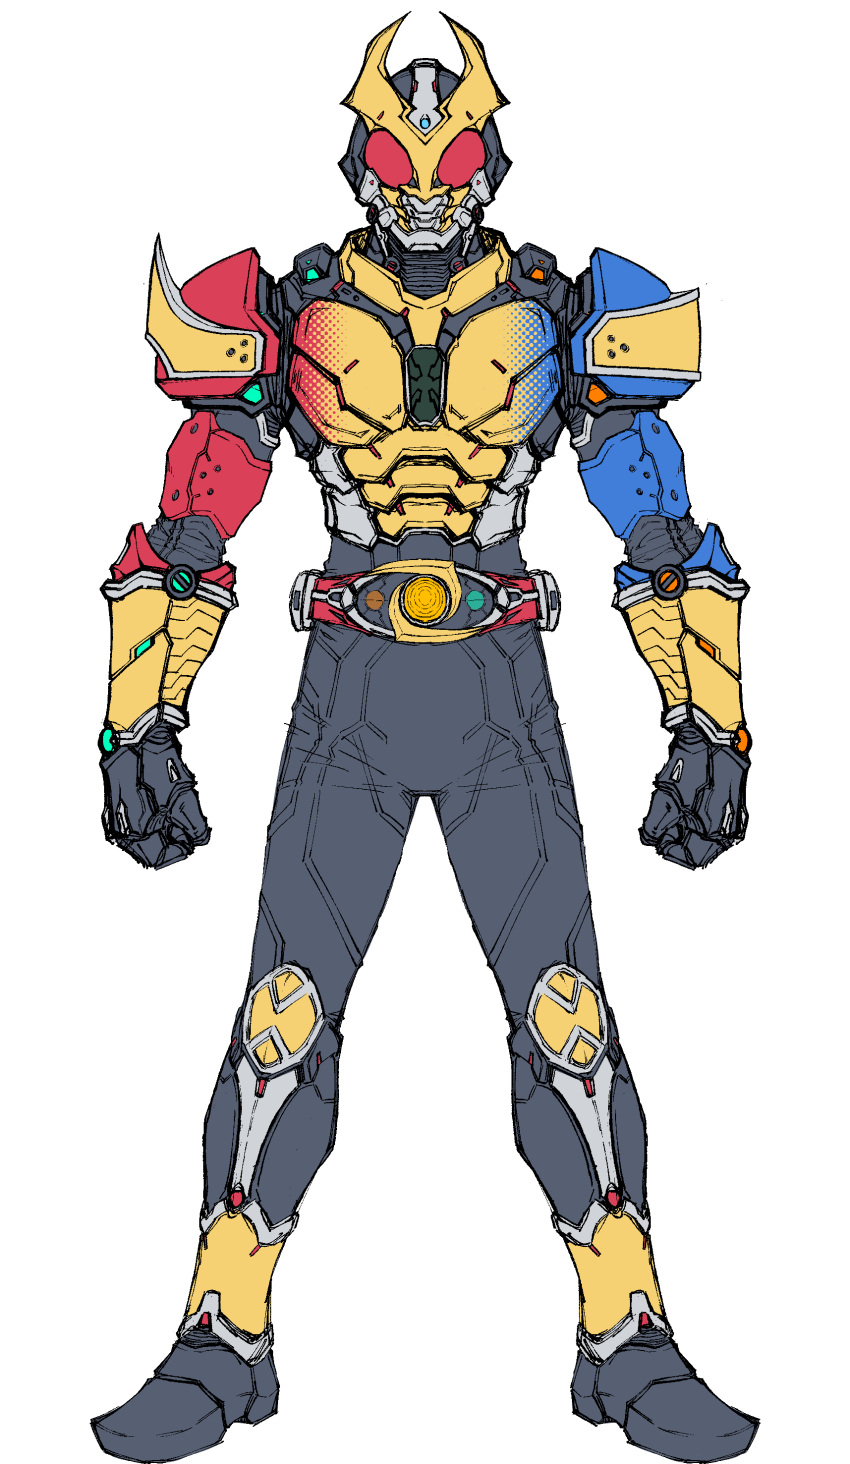 1boy absurdres agito_(trinity_form) altering_(agito) armor asymmetrical_armor belt blue_armor bodysuit compound_eyes full_body gold_horns helmet highres horns kamen_rider kamen_rider_agito kamen_rider_agito_(series) looking_at_viewer mask red_armor red_eyes rider_belt tokusatsu zd19990214